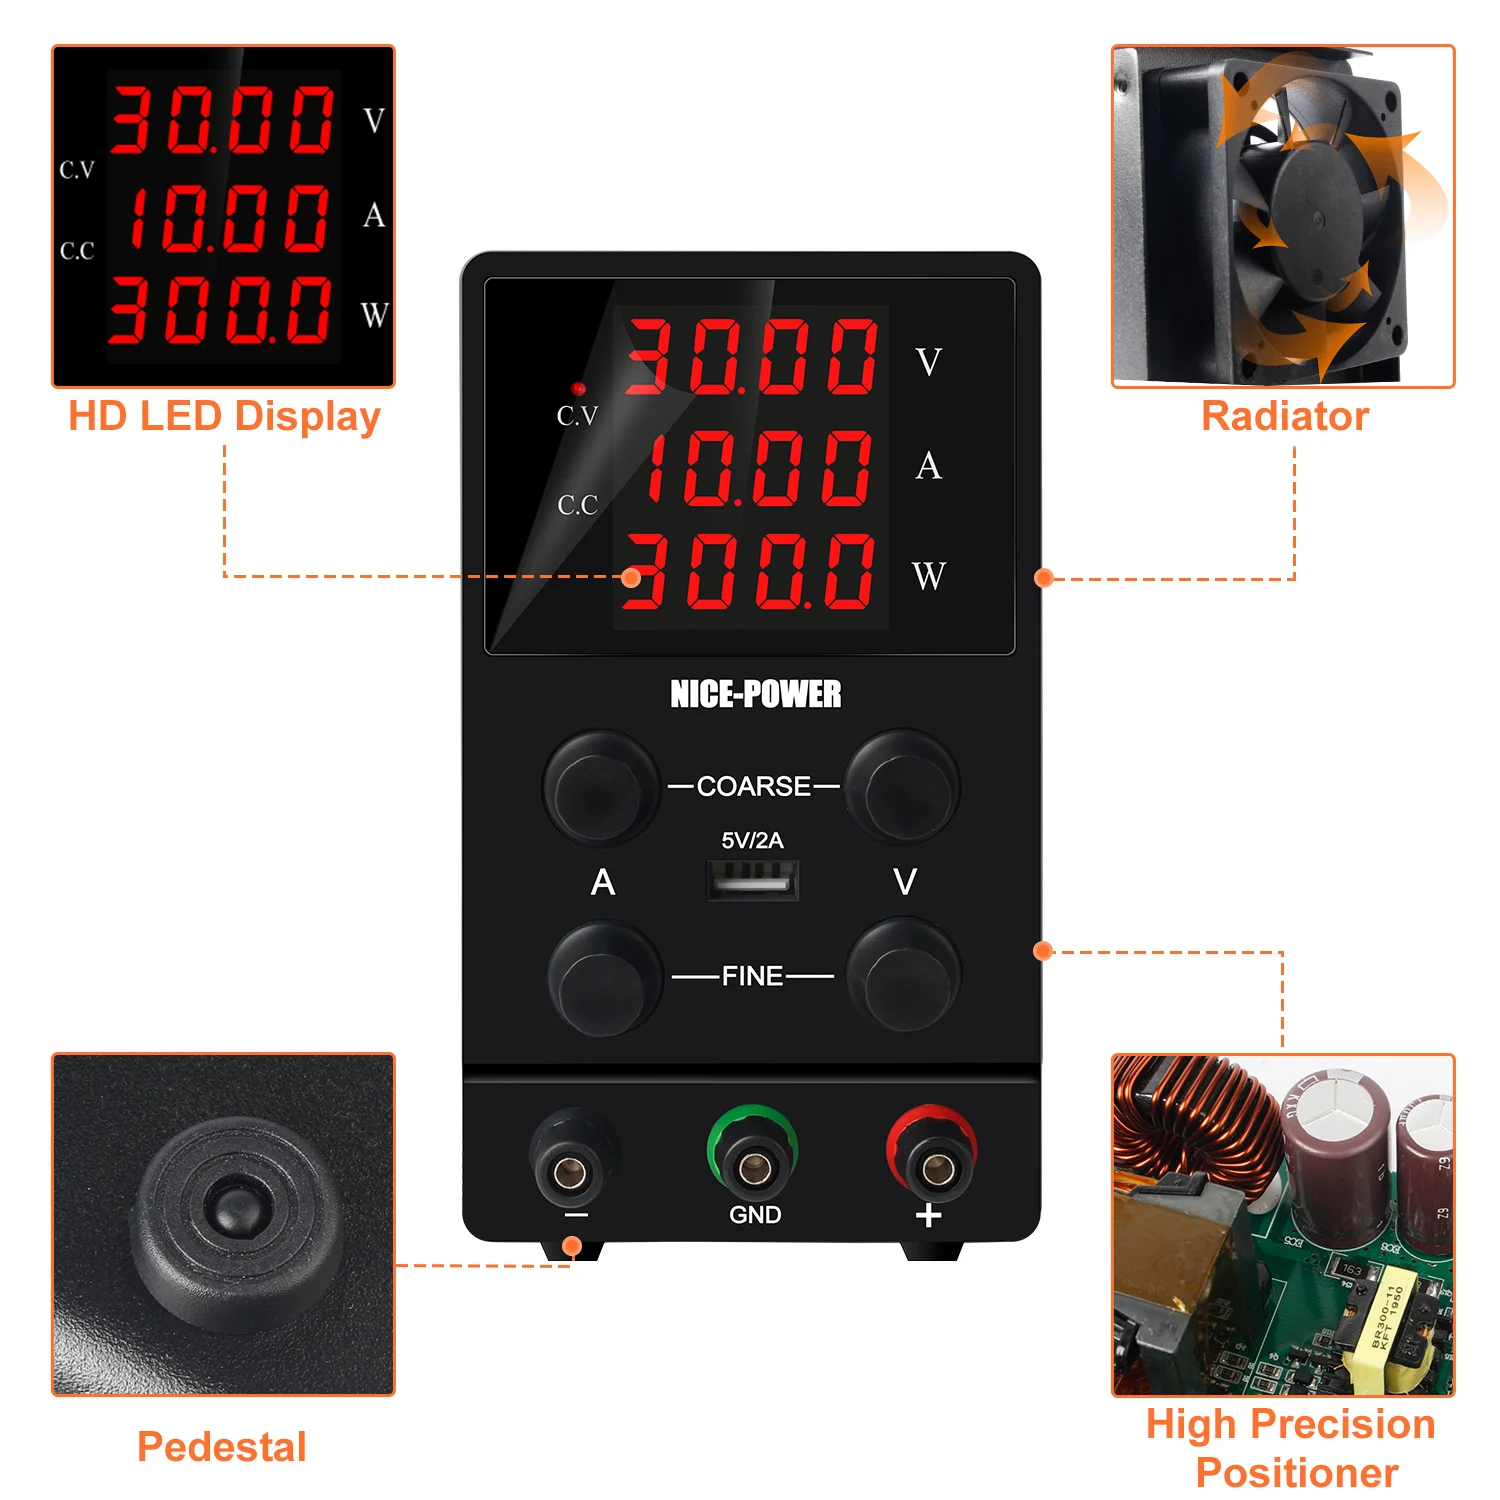 Sc0ee8e90962e4e988bd7c790d4949cc20 DC Power Supplies Adjustable Switching Voltage Regulator 30V10A/30V5A Laboratory Power Supply USB Interface LED Drone Charging